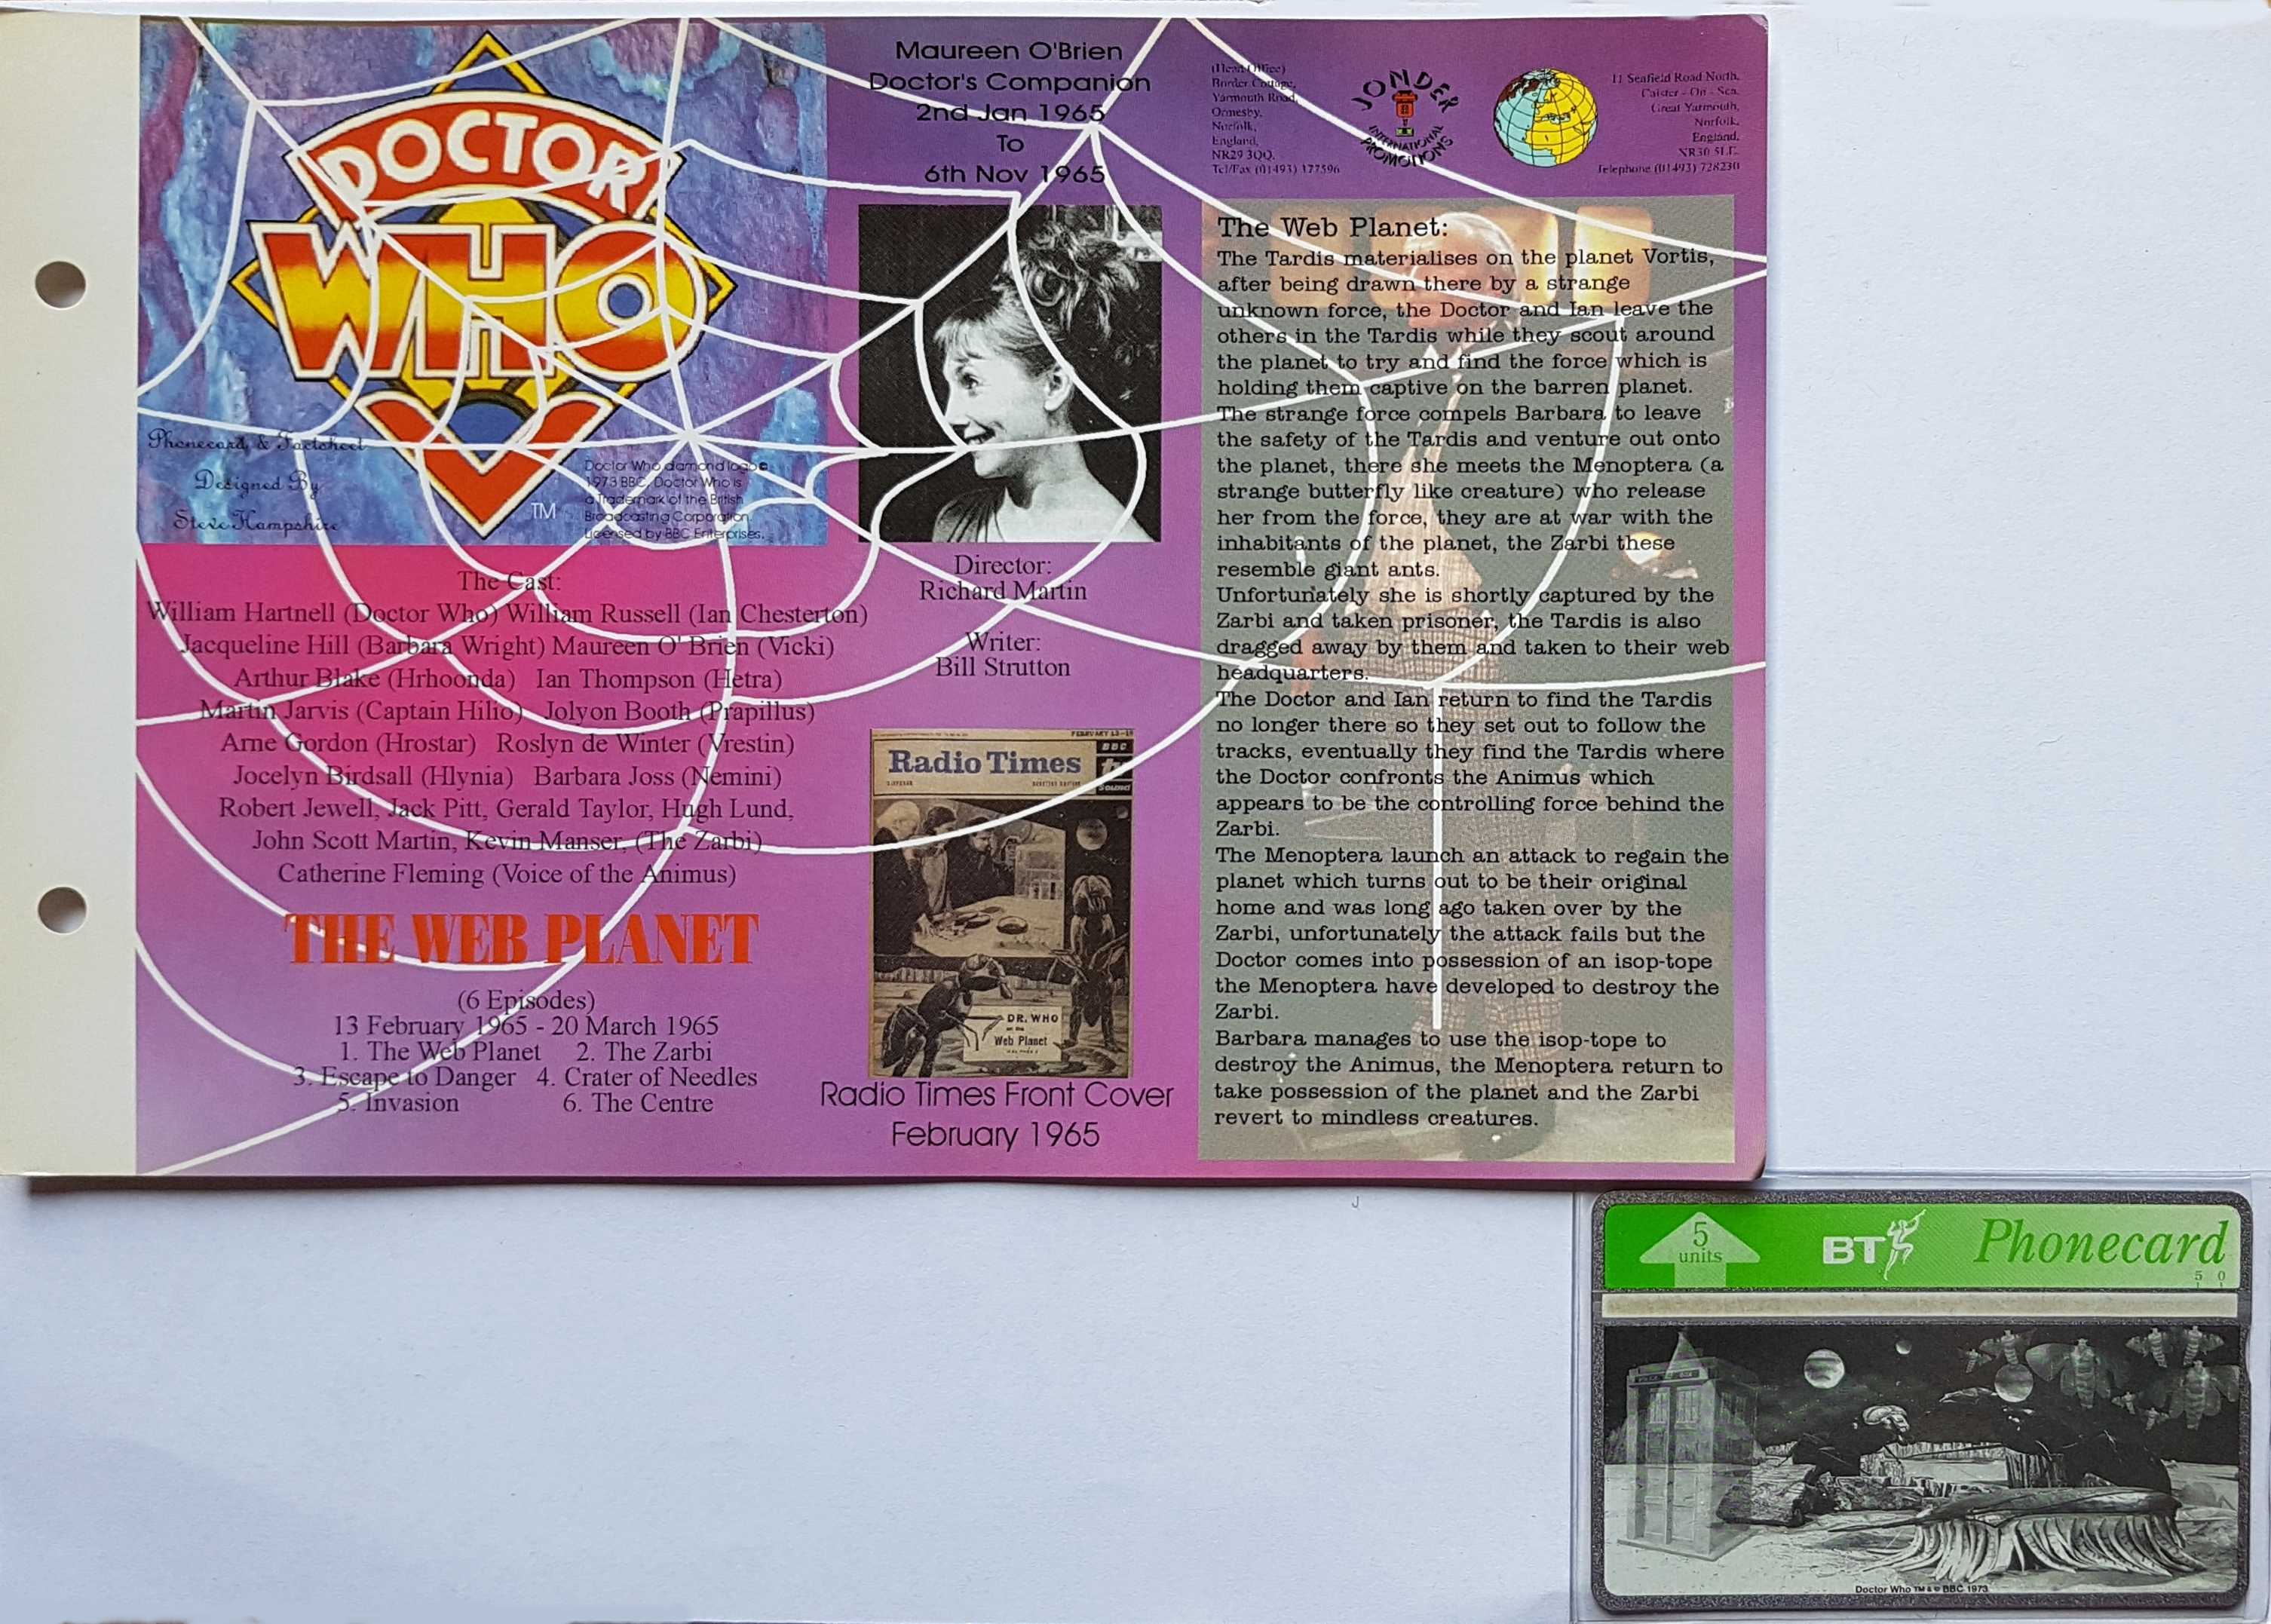 Picture of PC-BTG498 Doctor Who - The web planet - Phone card by artist  from the BBC records and Tapes library